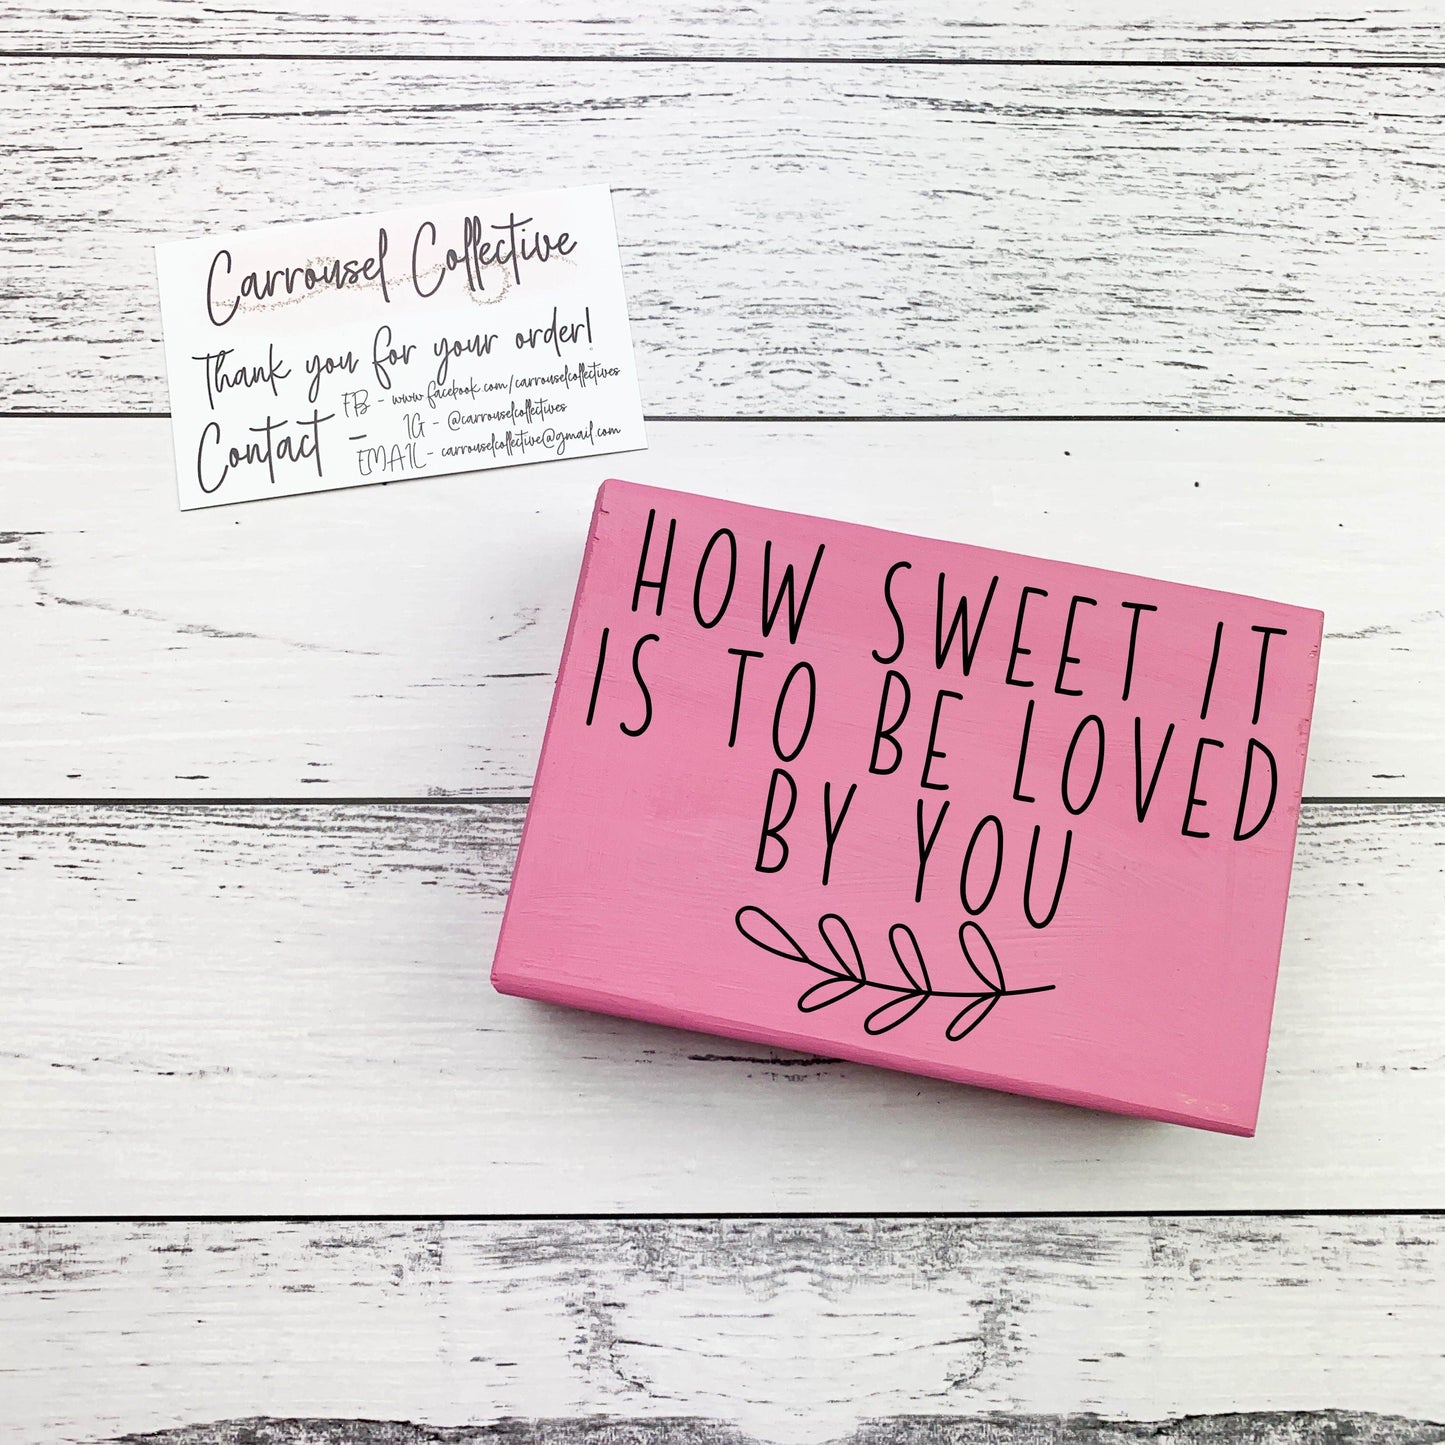 How Sweet it is to Be Loved by You - Valentines Wood sign